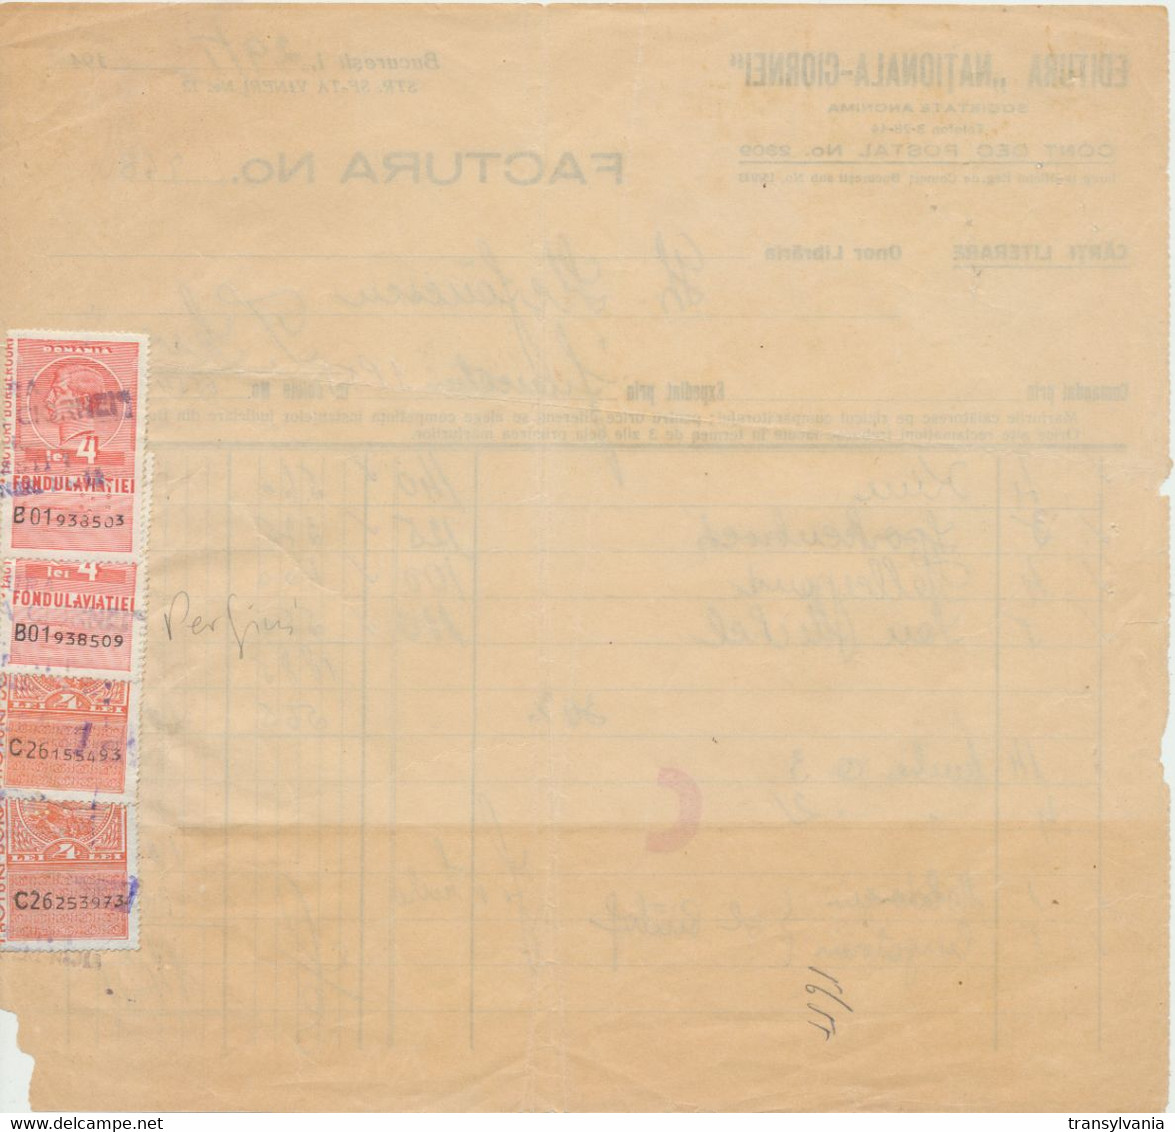 Romania 1940 Invoice Of Nationala-Ciornei Publishing House With 4 Revenue Stamps Perfins King Charles II - Revenue Stamps